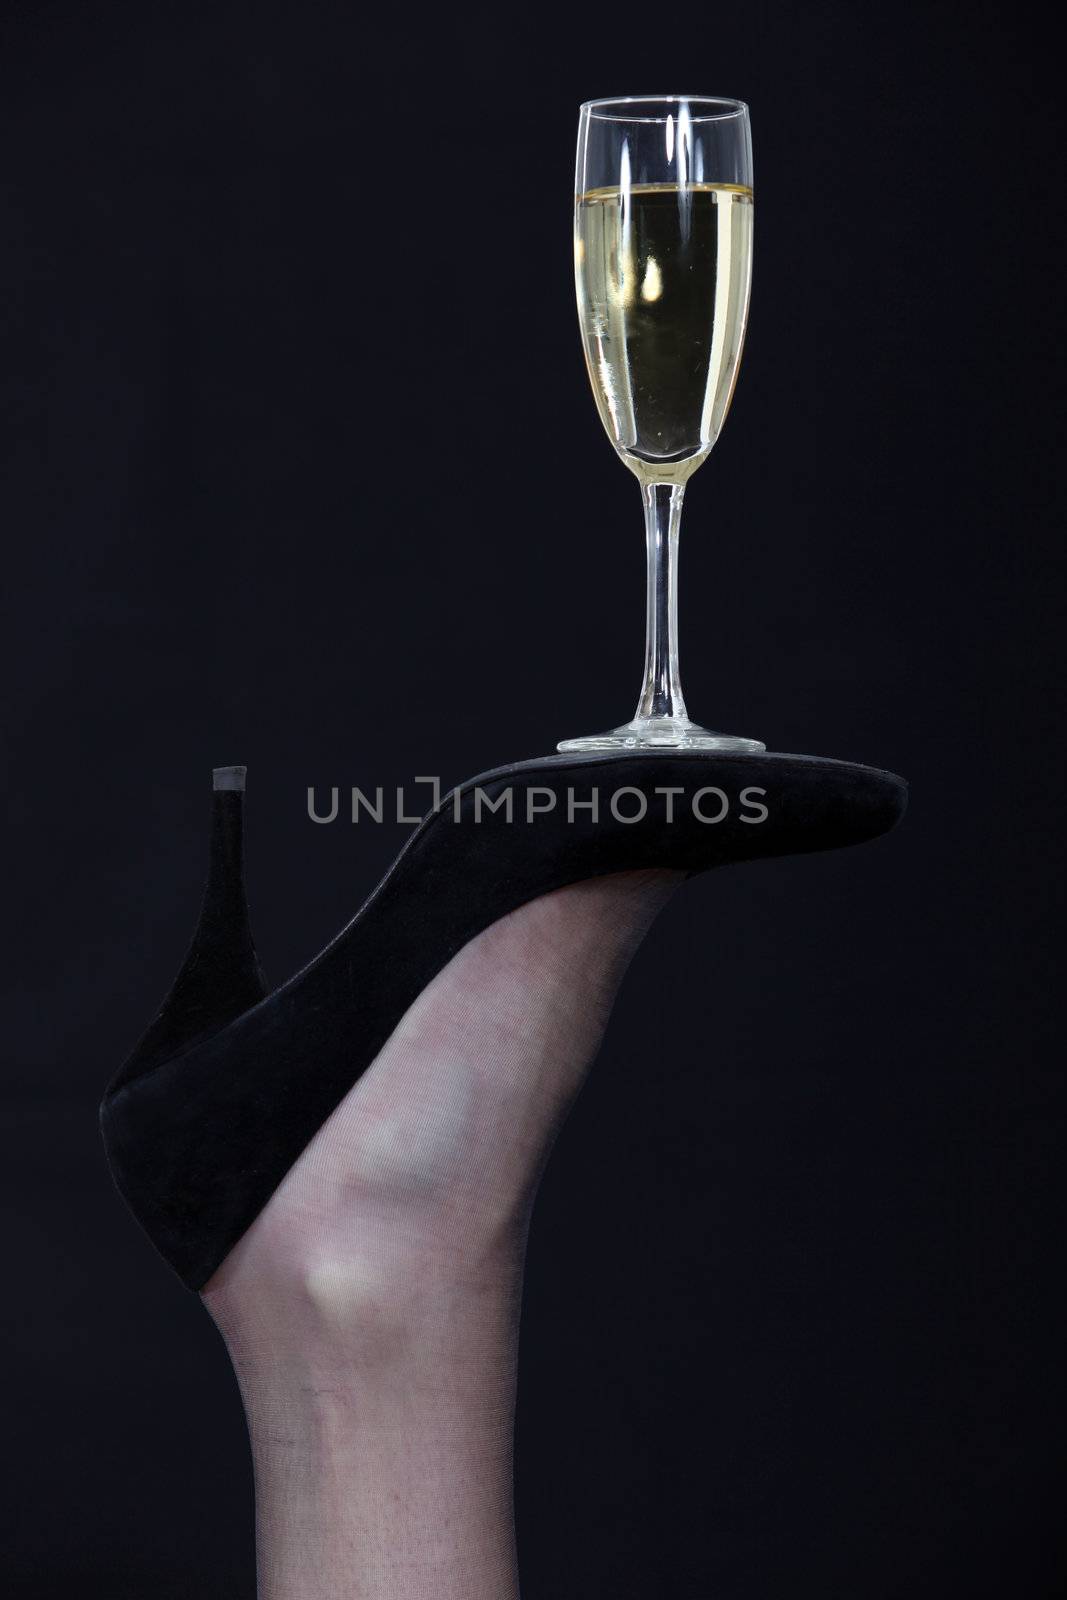 A champagne glass balanced on the sole of a shoe